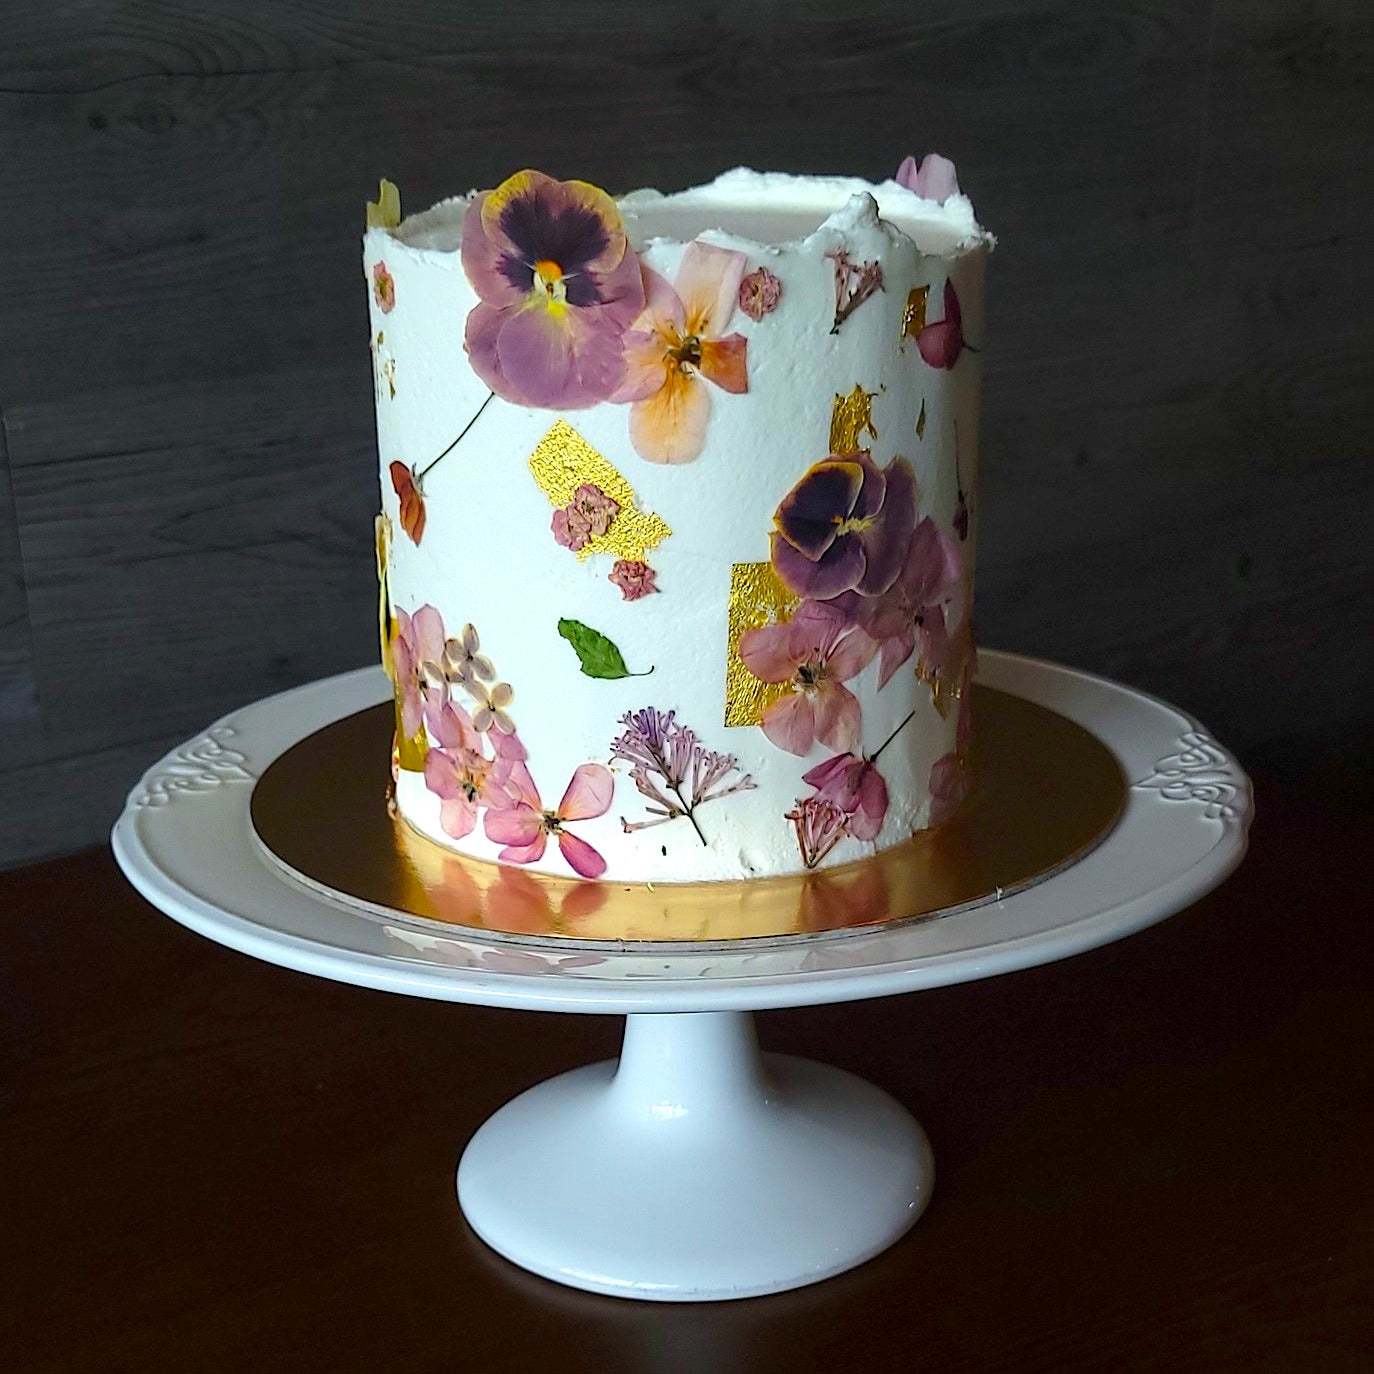 Flower cake - gluten-free and dairy-free with real edible flowers